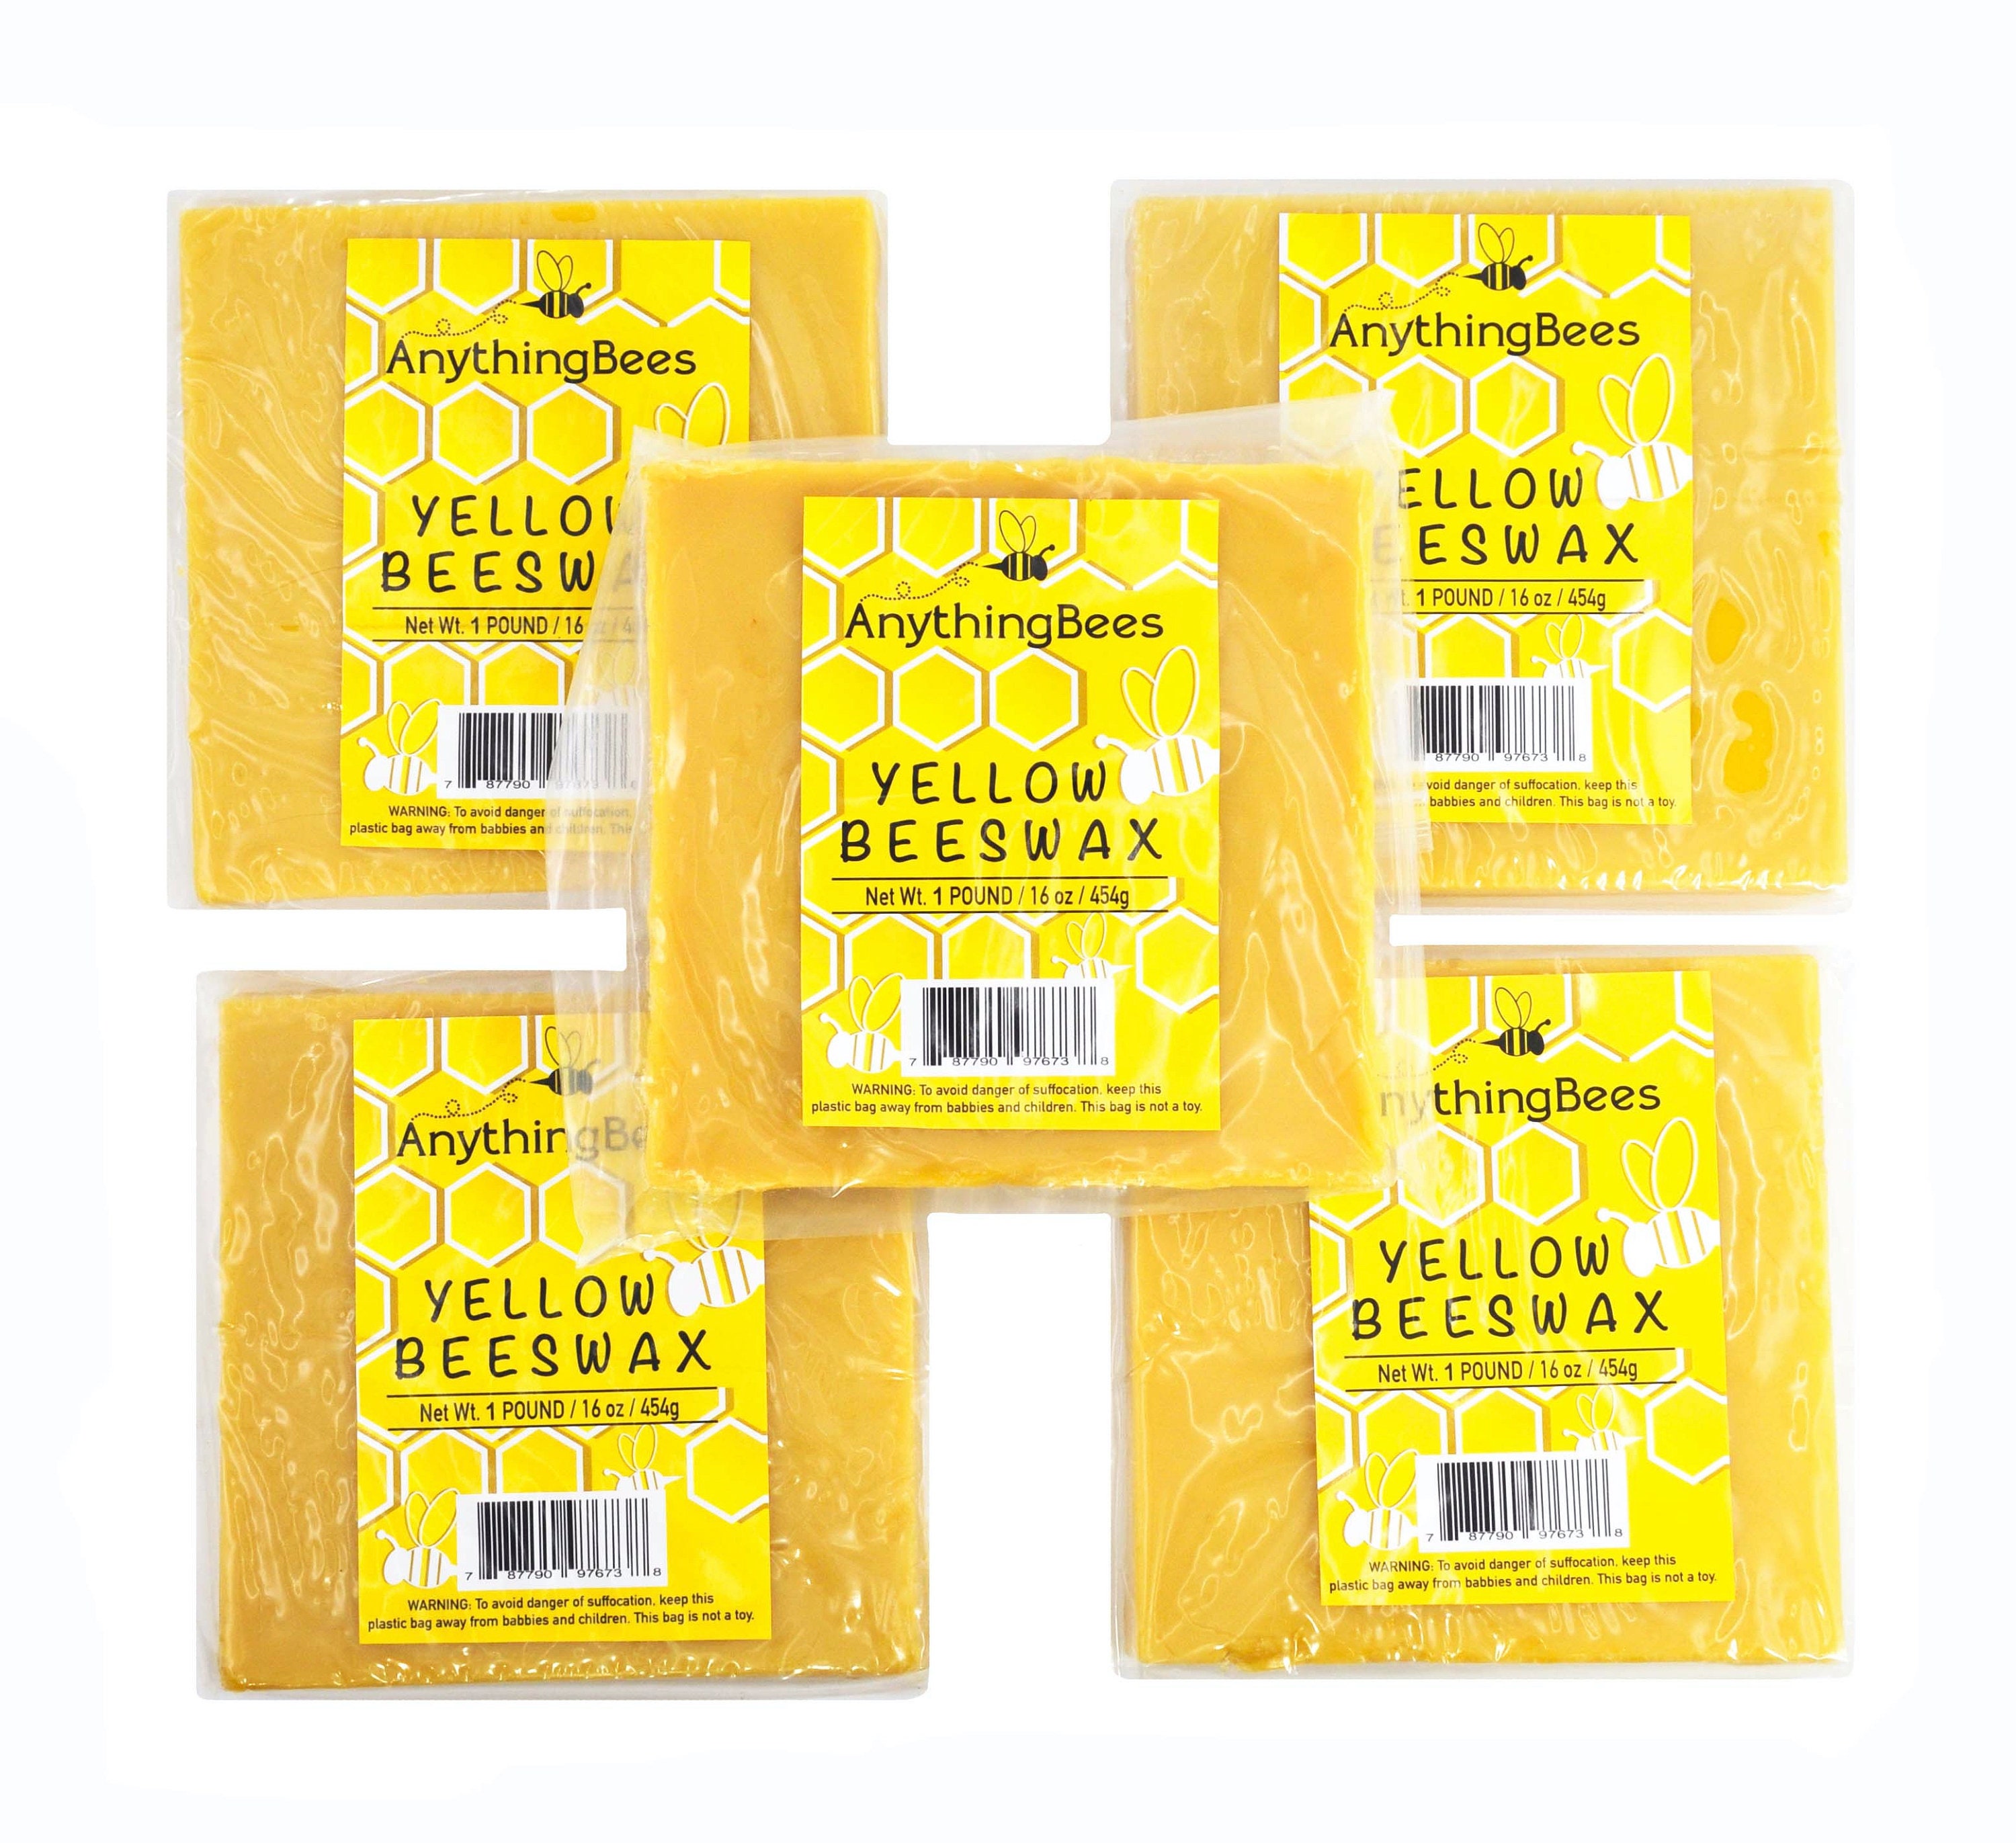 Refined High Acid White Beeswax X - China Beeswax Pellets, Beeswax